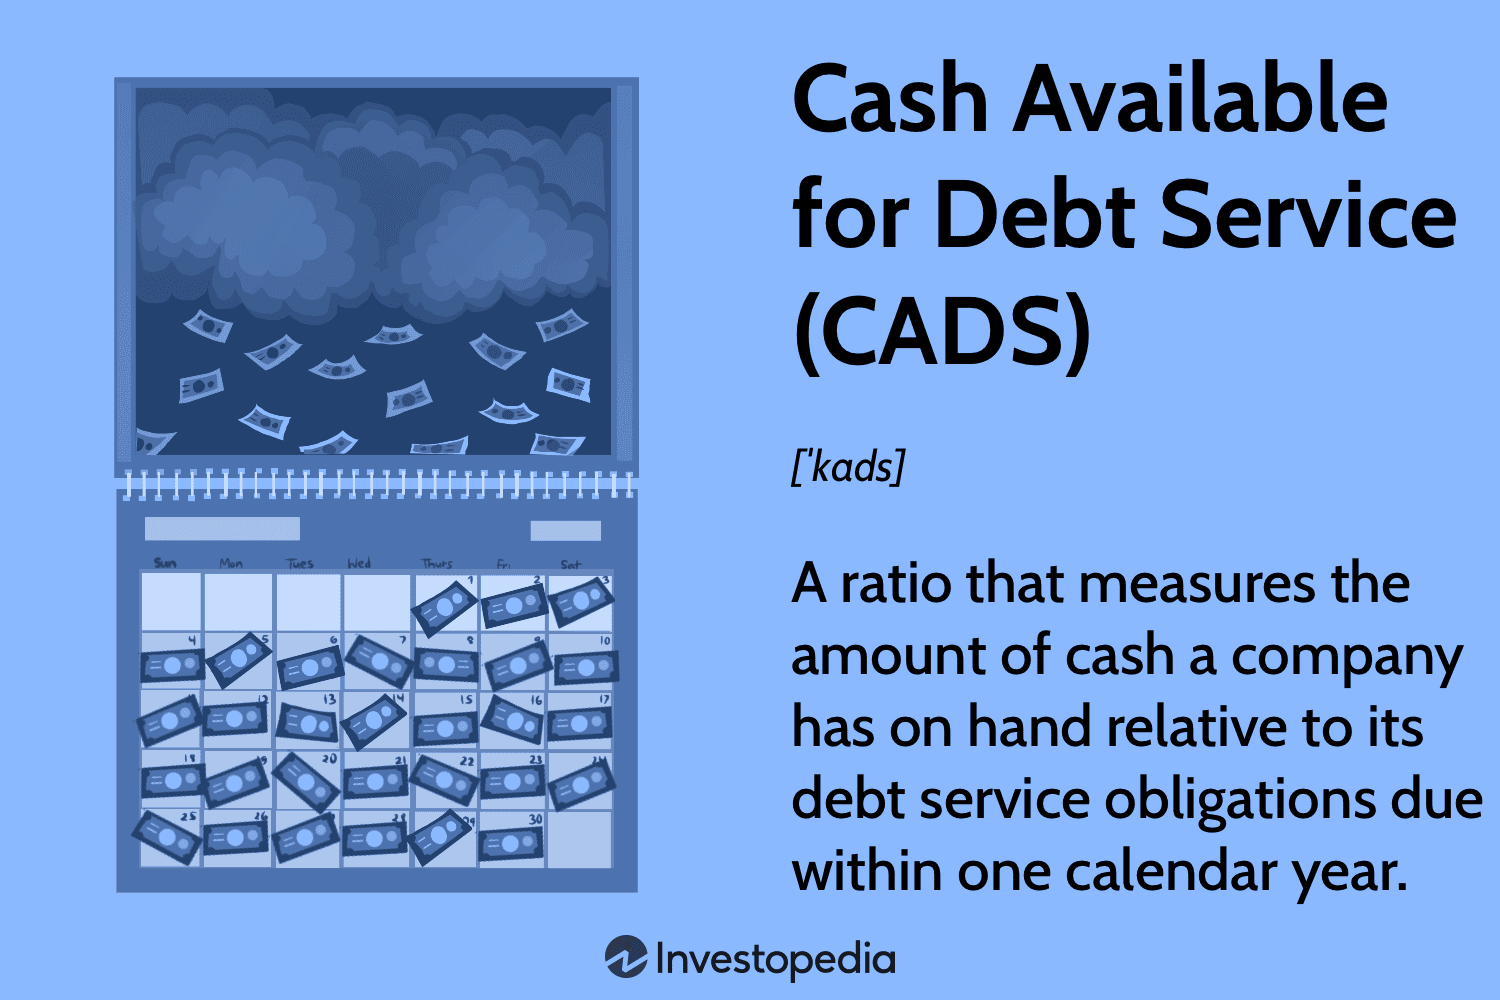 Cash Available for Debt Service (CADS)